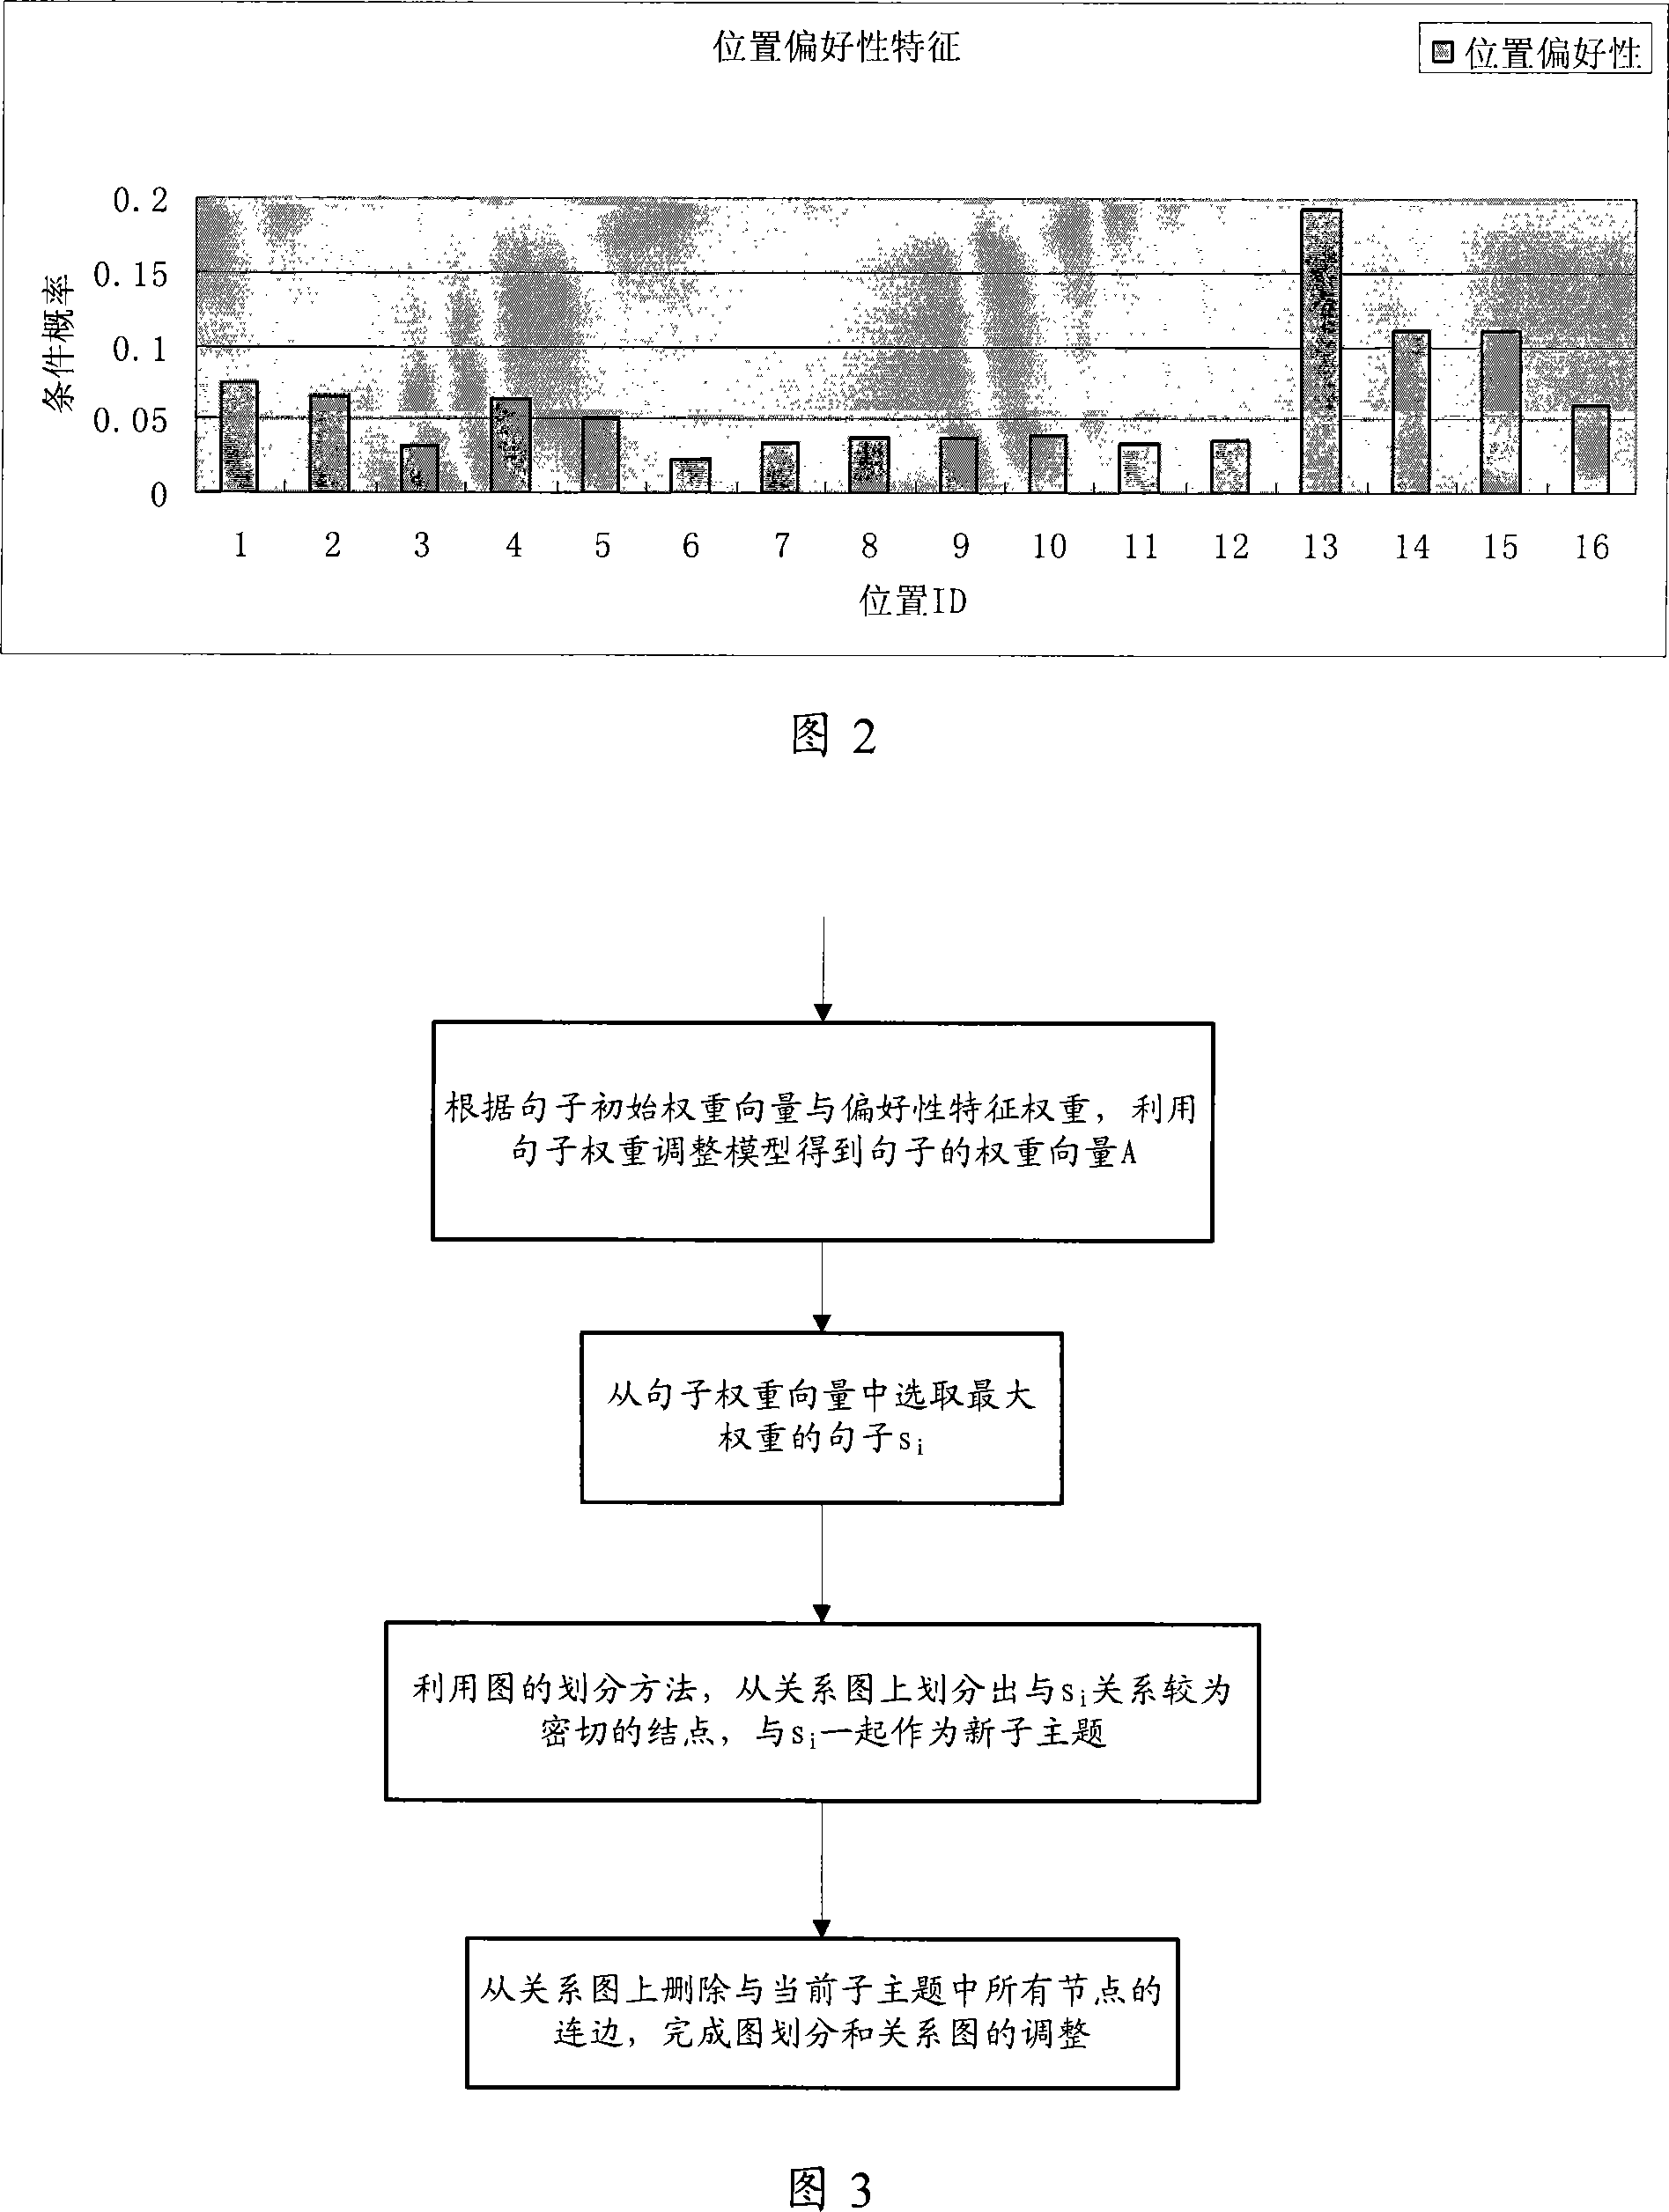 Autoabstract method for multi-document